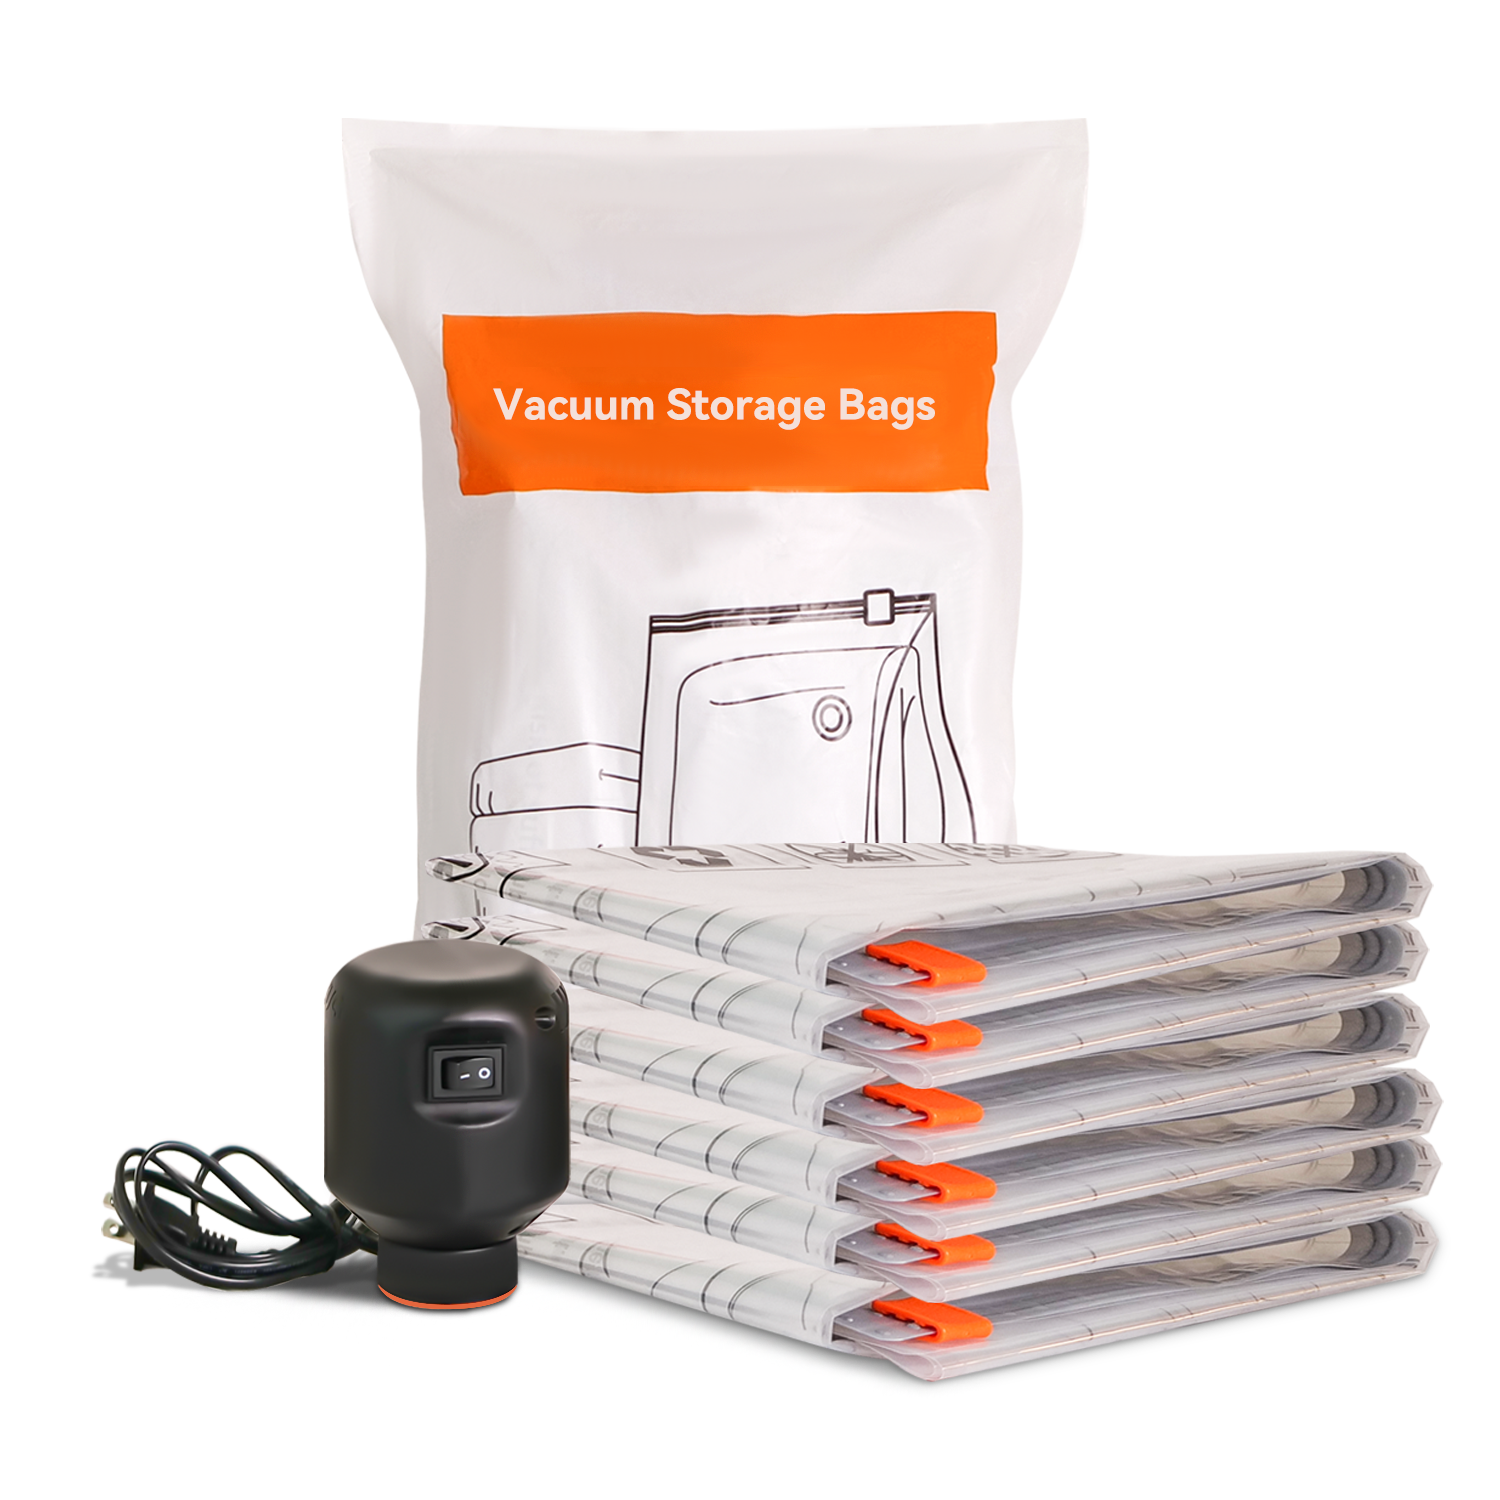 Vacuum Storage Bags for Clothes